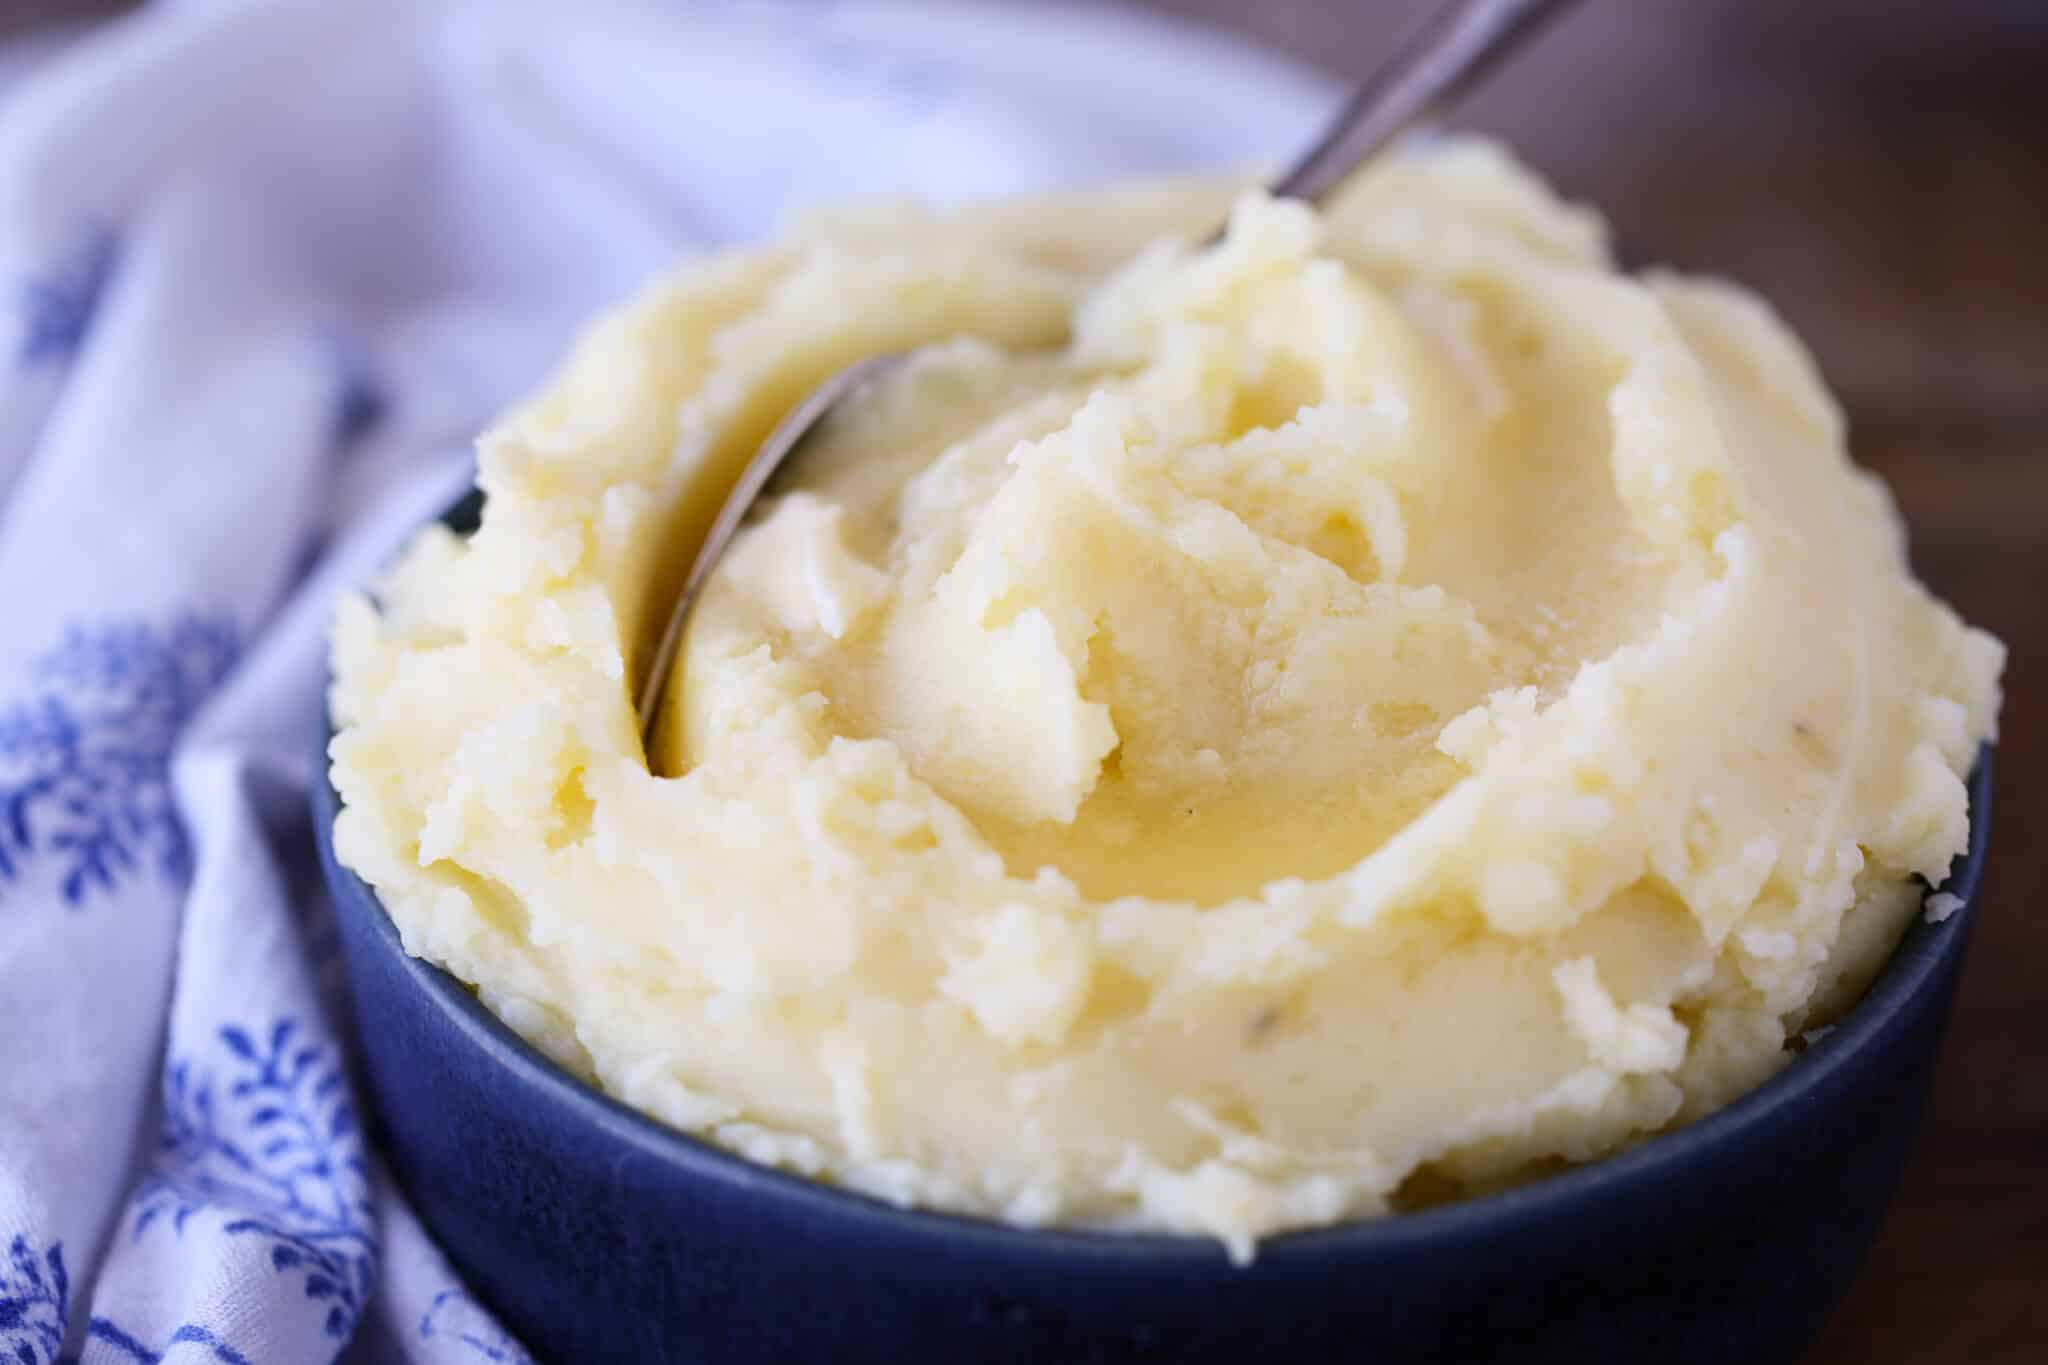 Creamy Mashed Potatoes Recipe in blue bowl with blue napkin